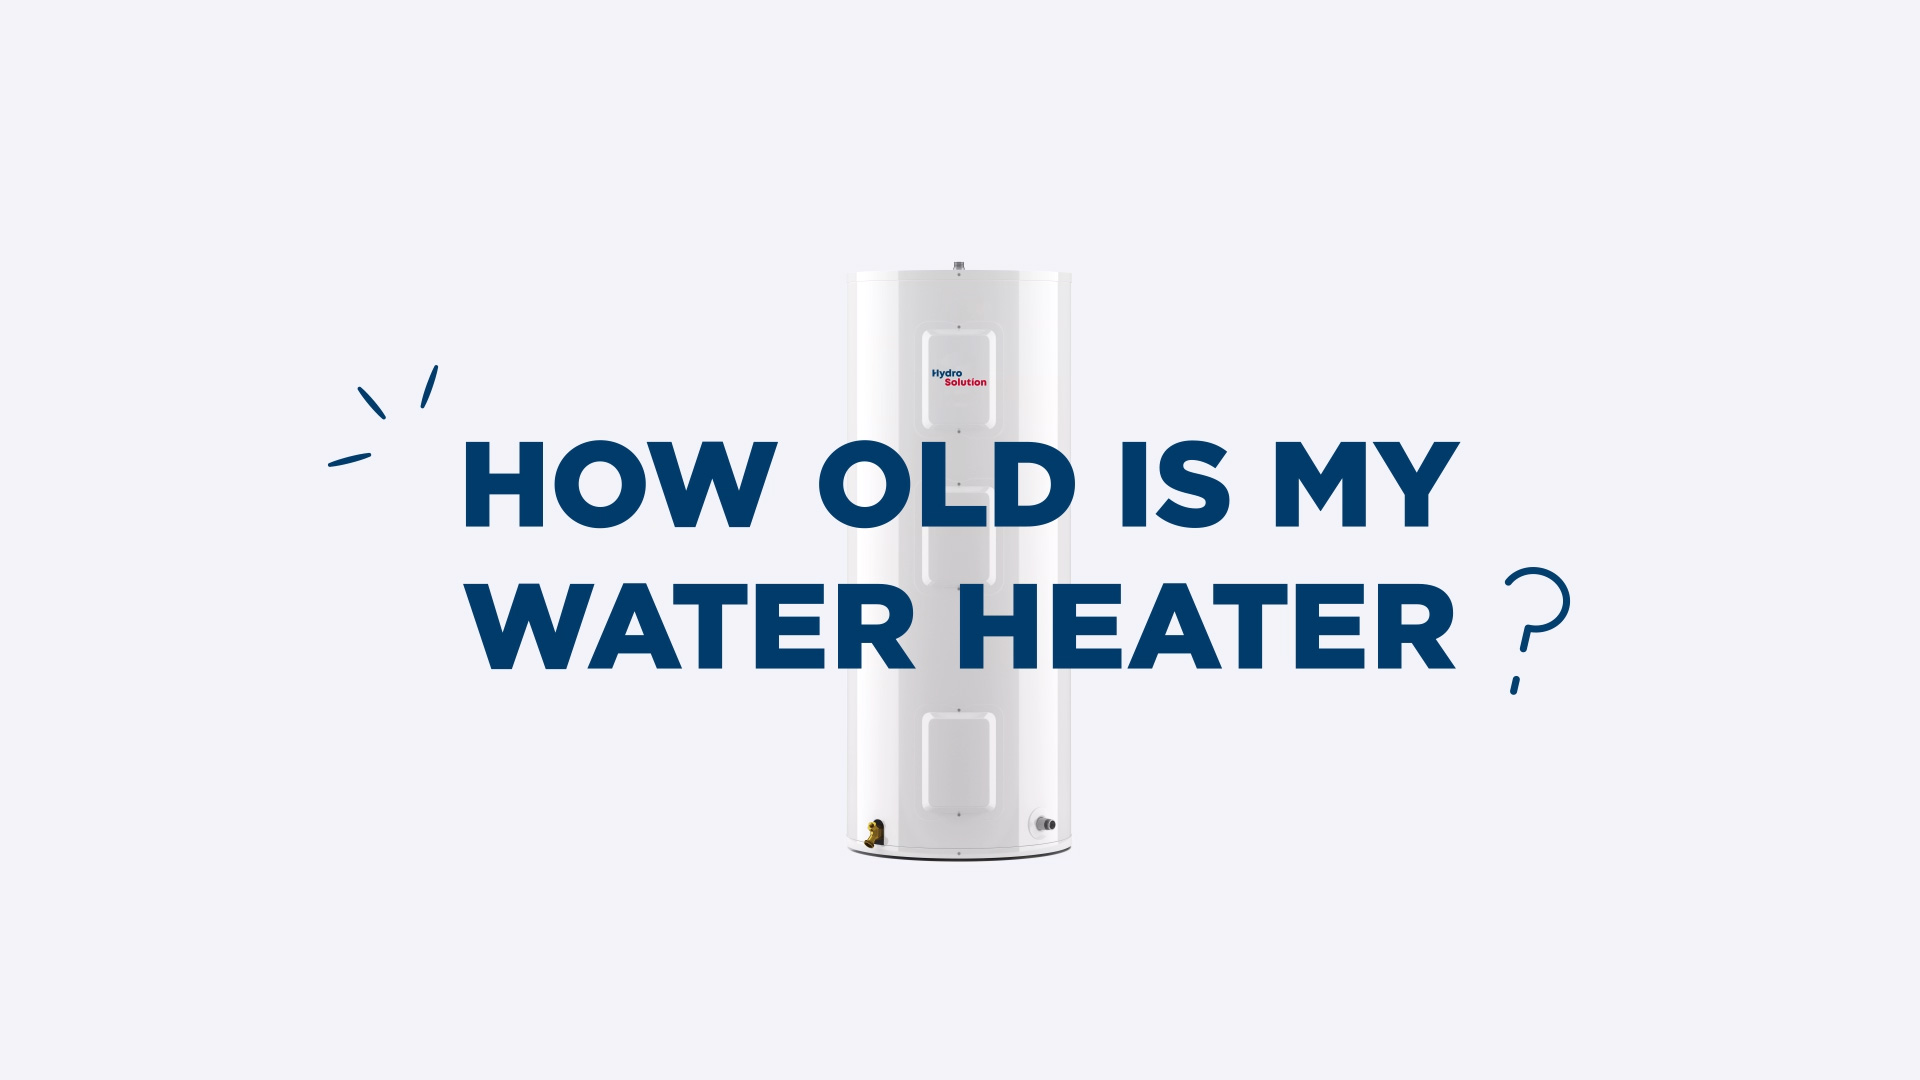 How old is my water heater?